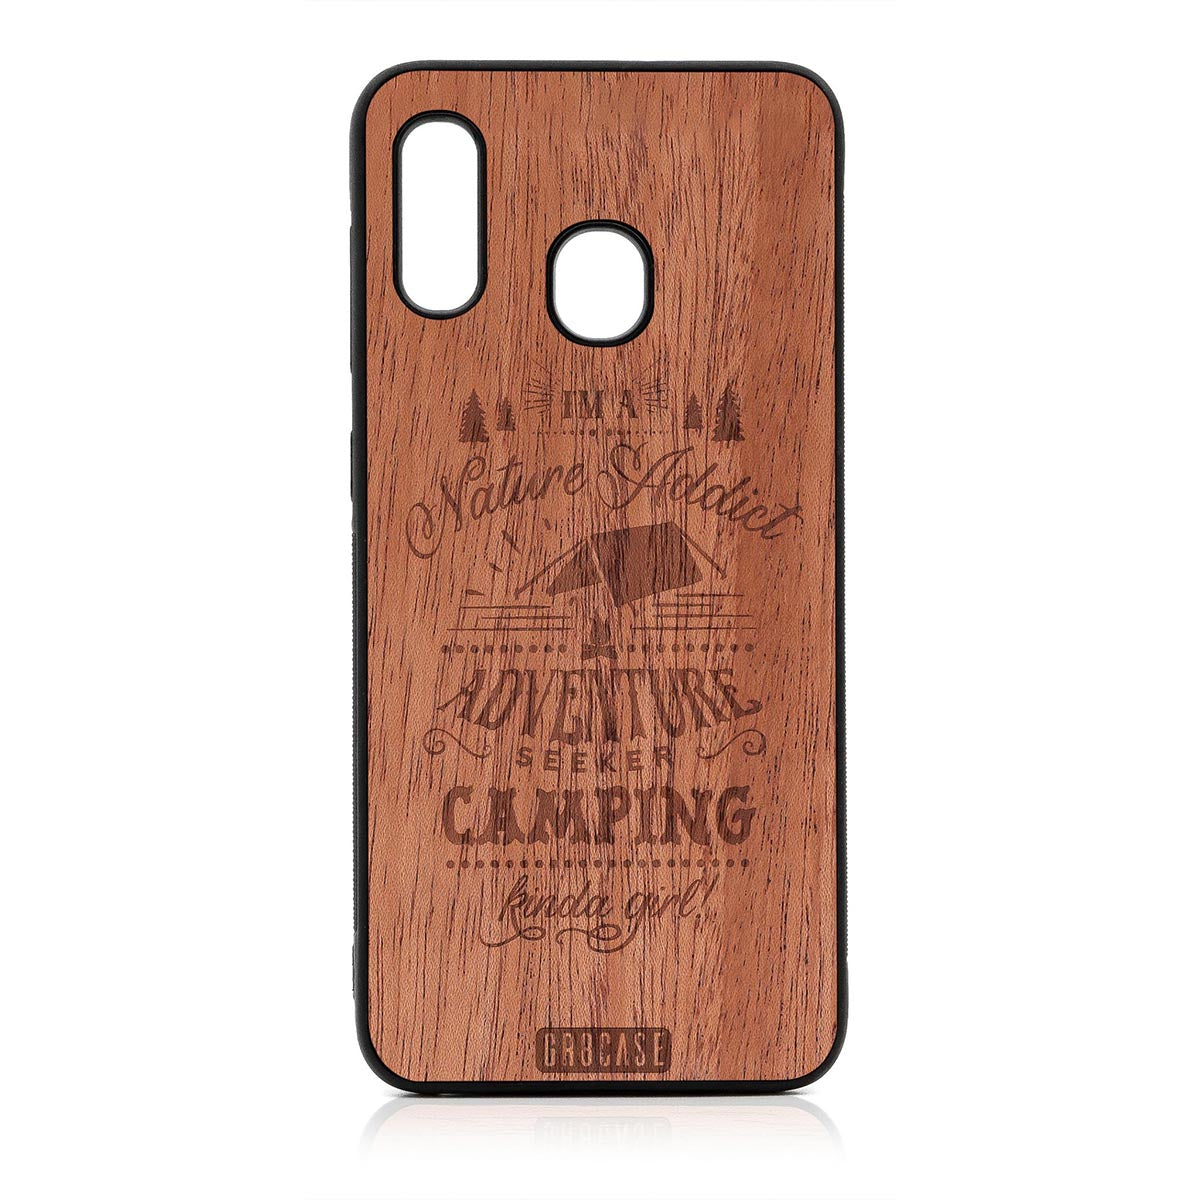 I'm A Nature Addict Adventure Seeker Camping Kinda Girl Design Wood Case For Samsung Galaxy A20 by GR8CASE